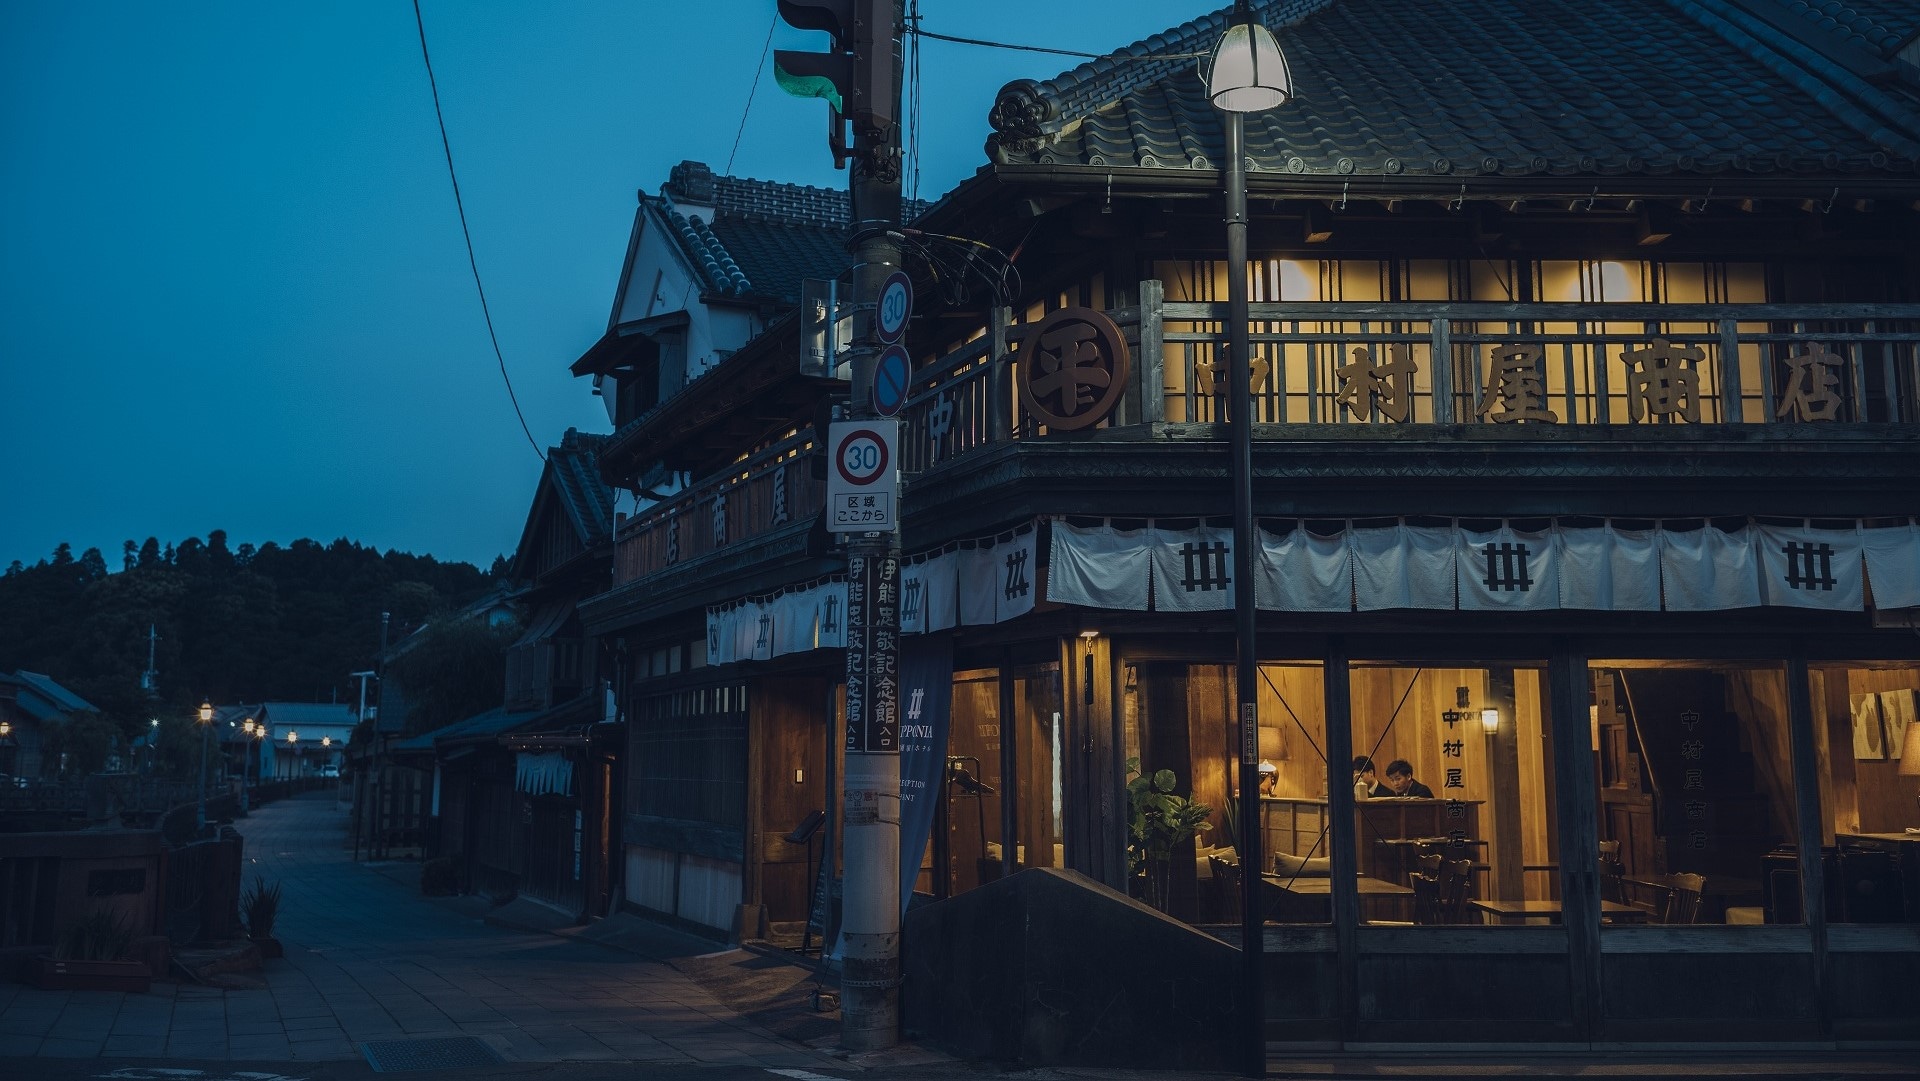 [Exterior] In the townscape that has continued since the Edo period, old buildings are still alive.